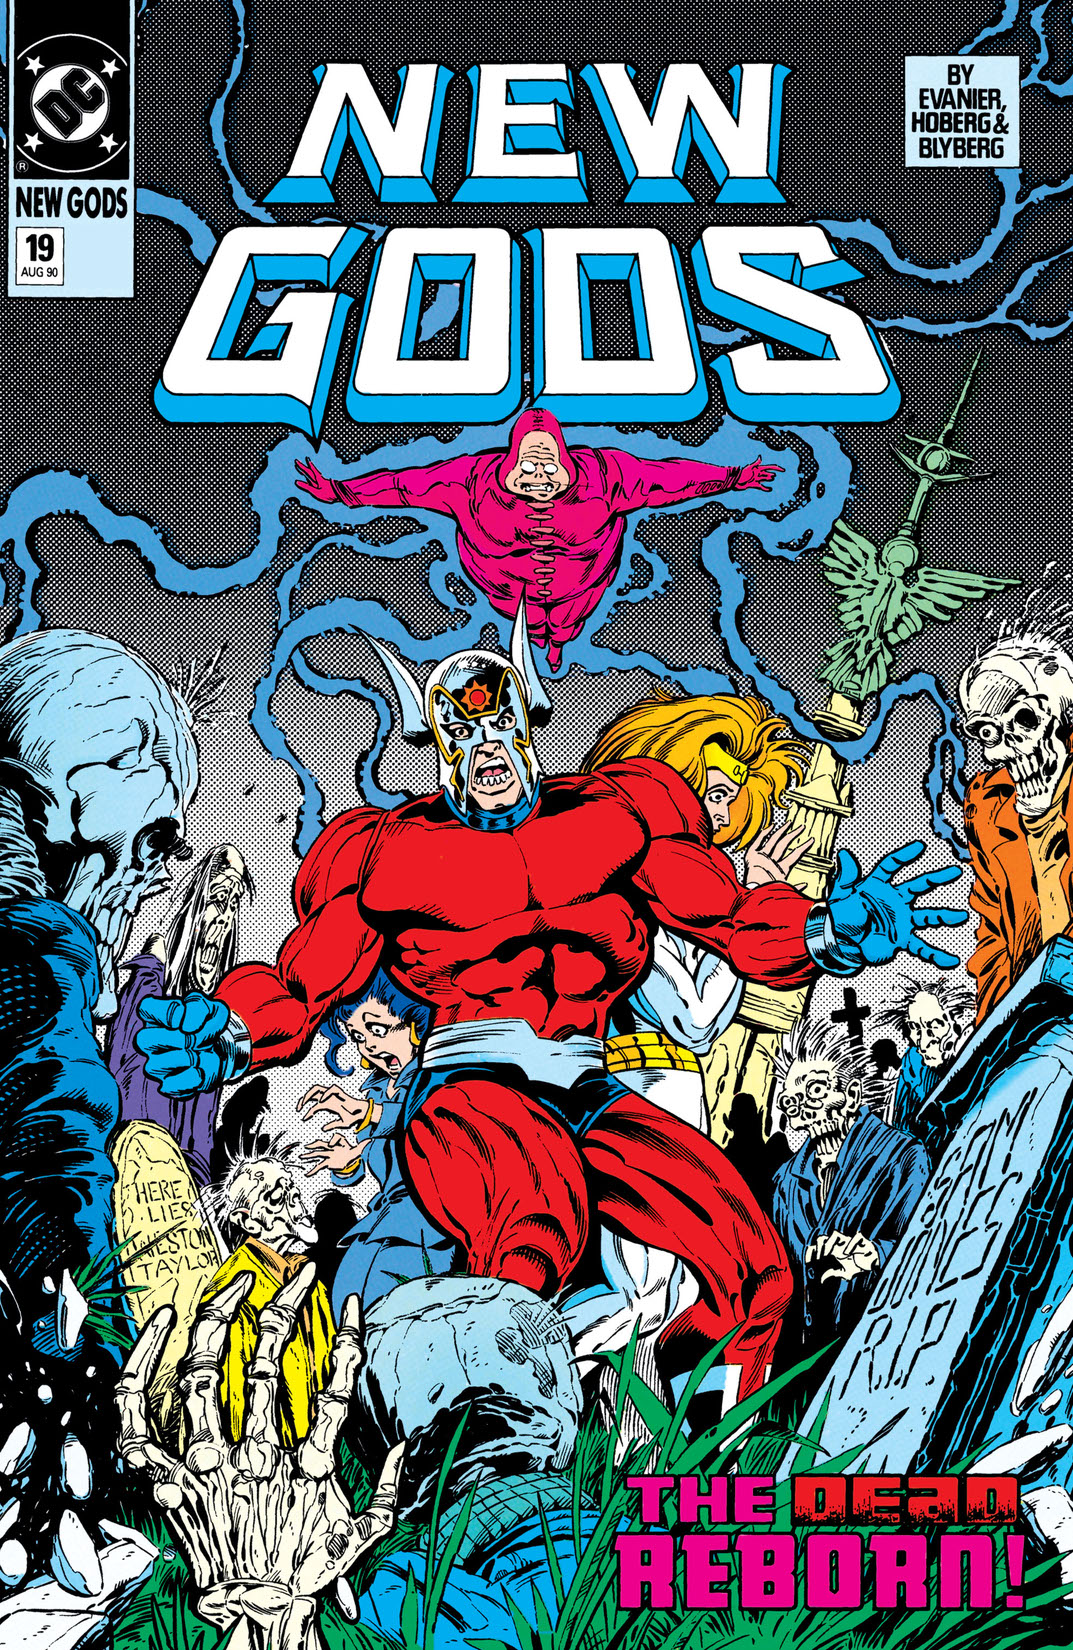 New Gods (1989-) #19 preview images